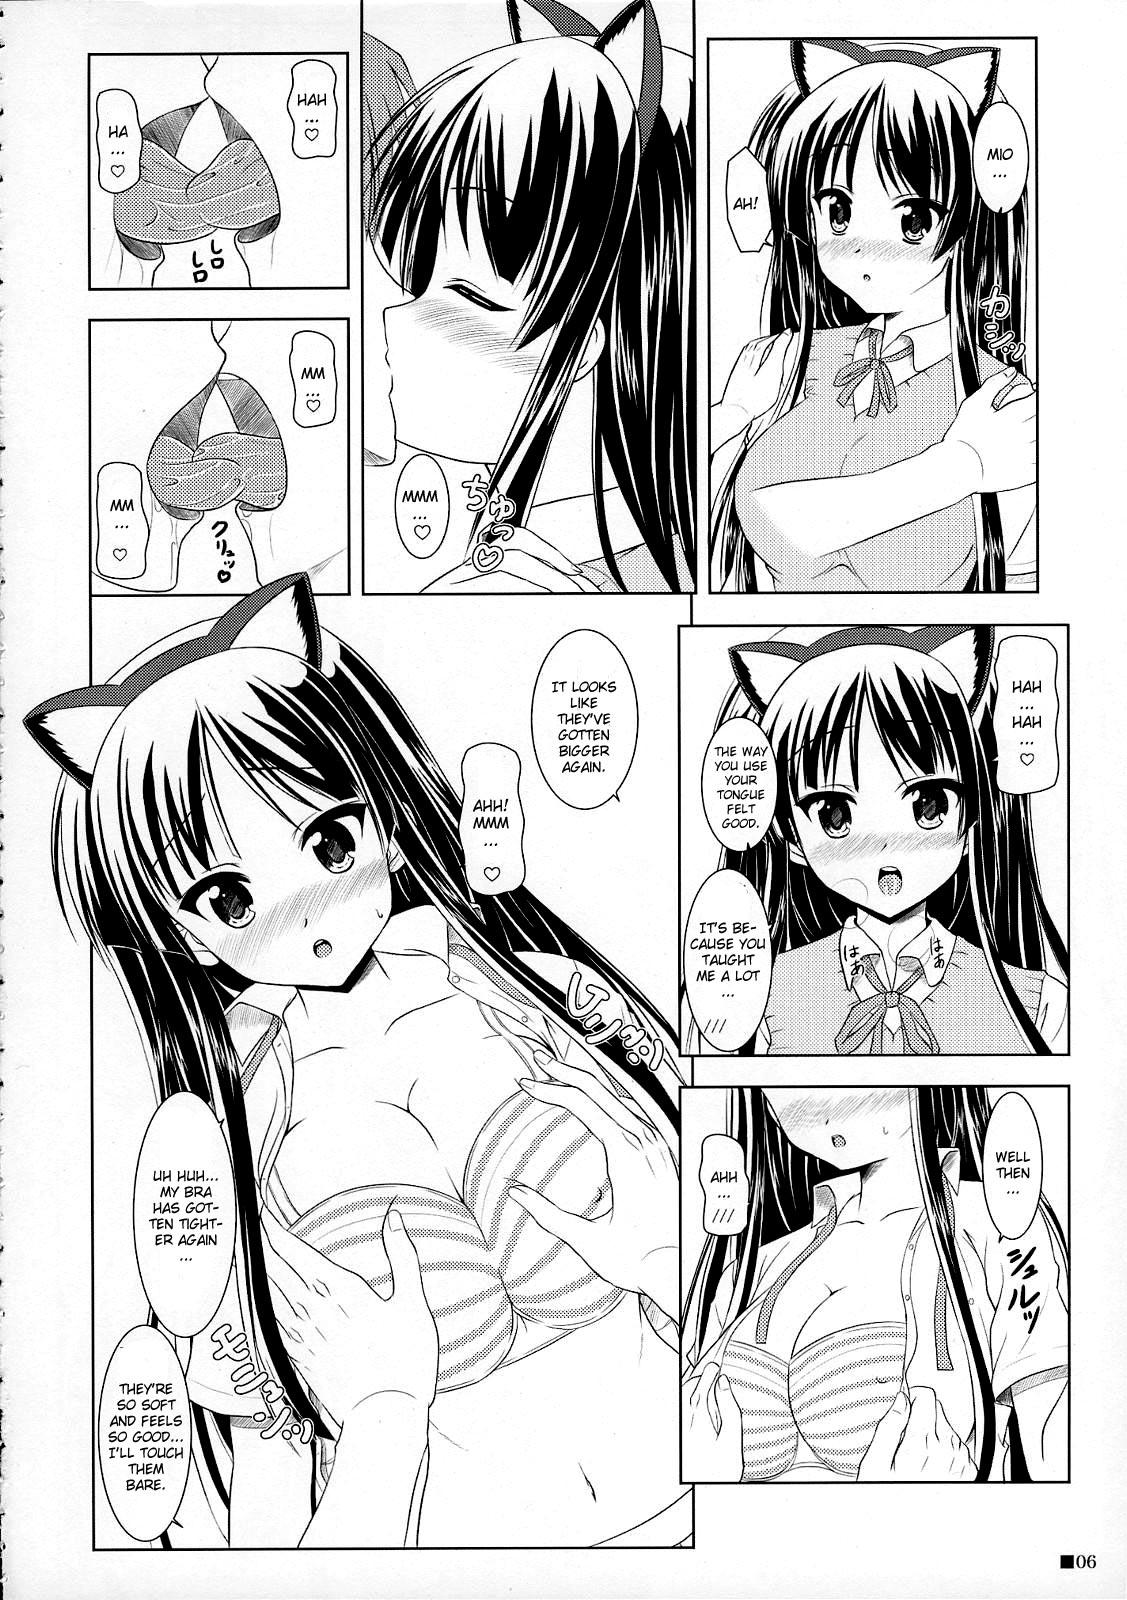 Furry Mio-Nyan! - K-on Assfucked - Page 5